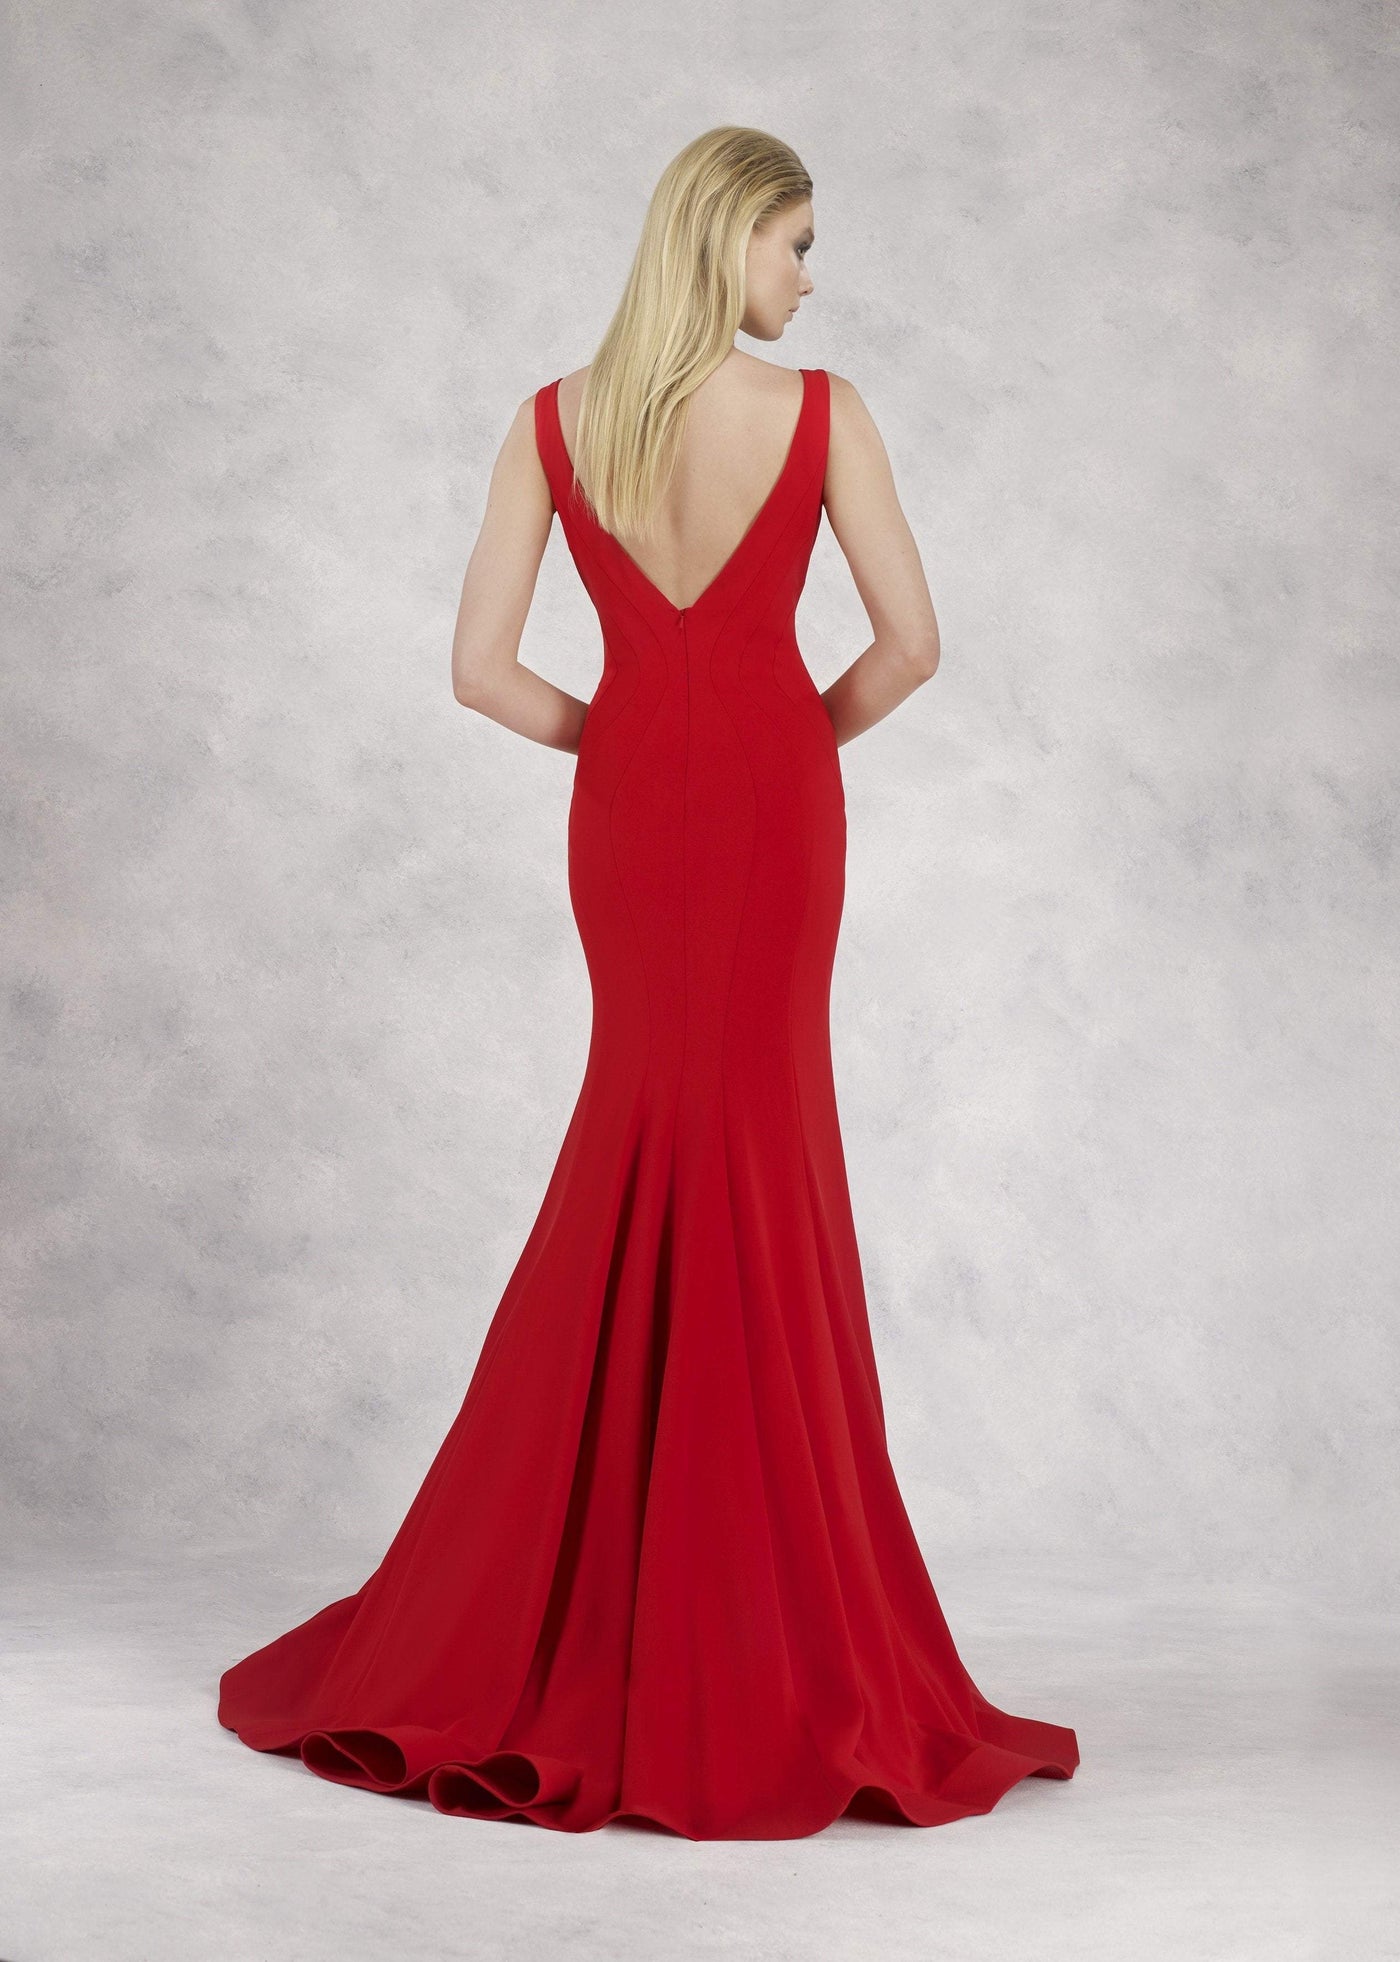 Janique - JQ1820 Sleeveless Vibrant Crepe Mermaid Gown in Red